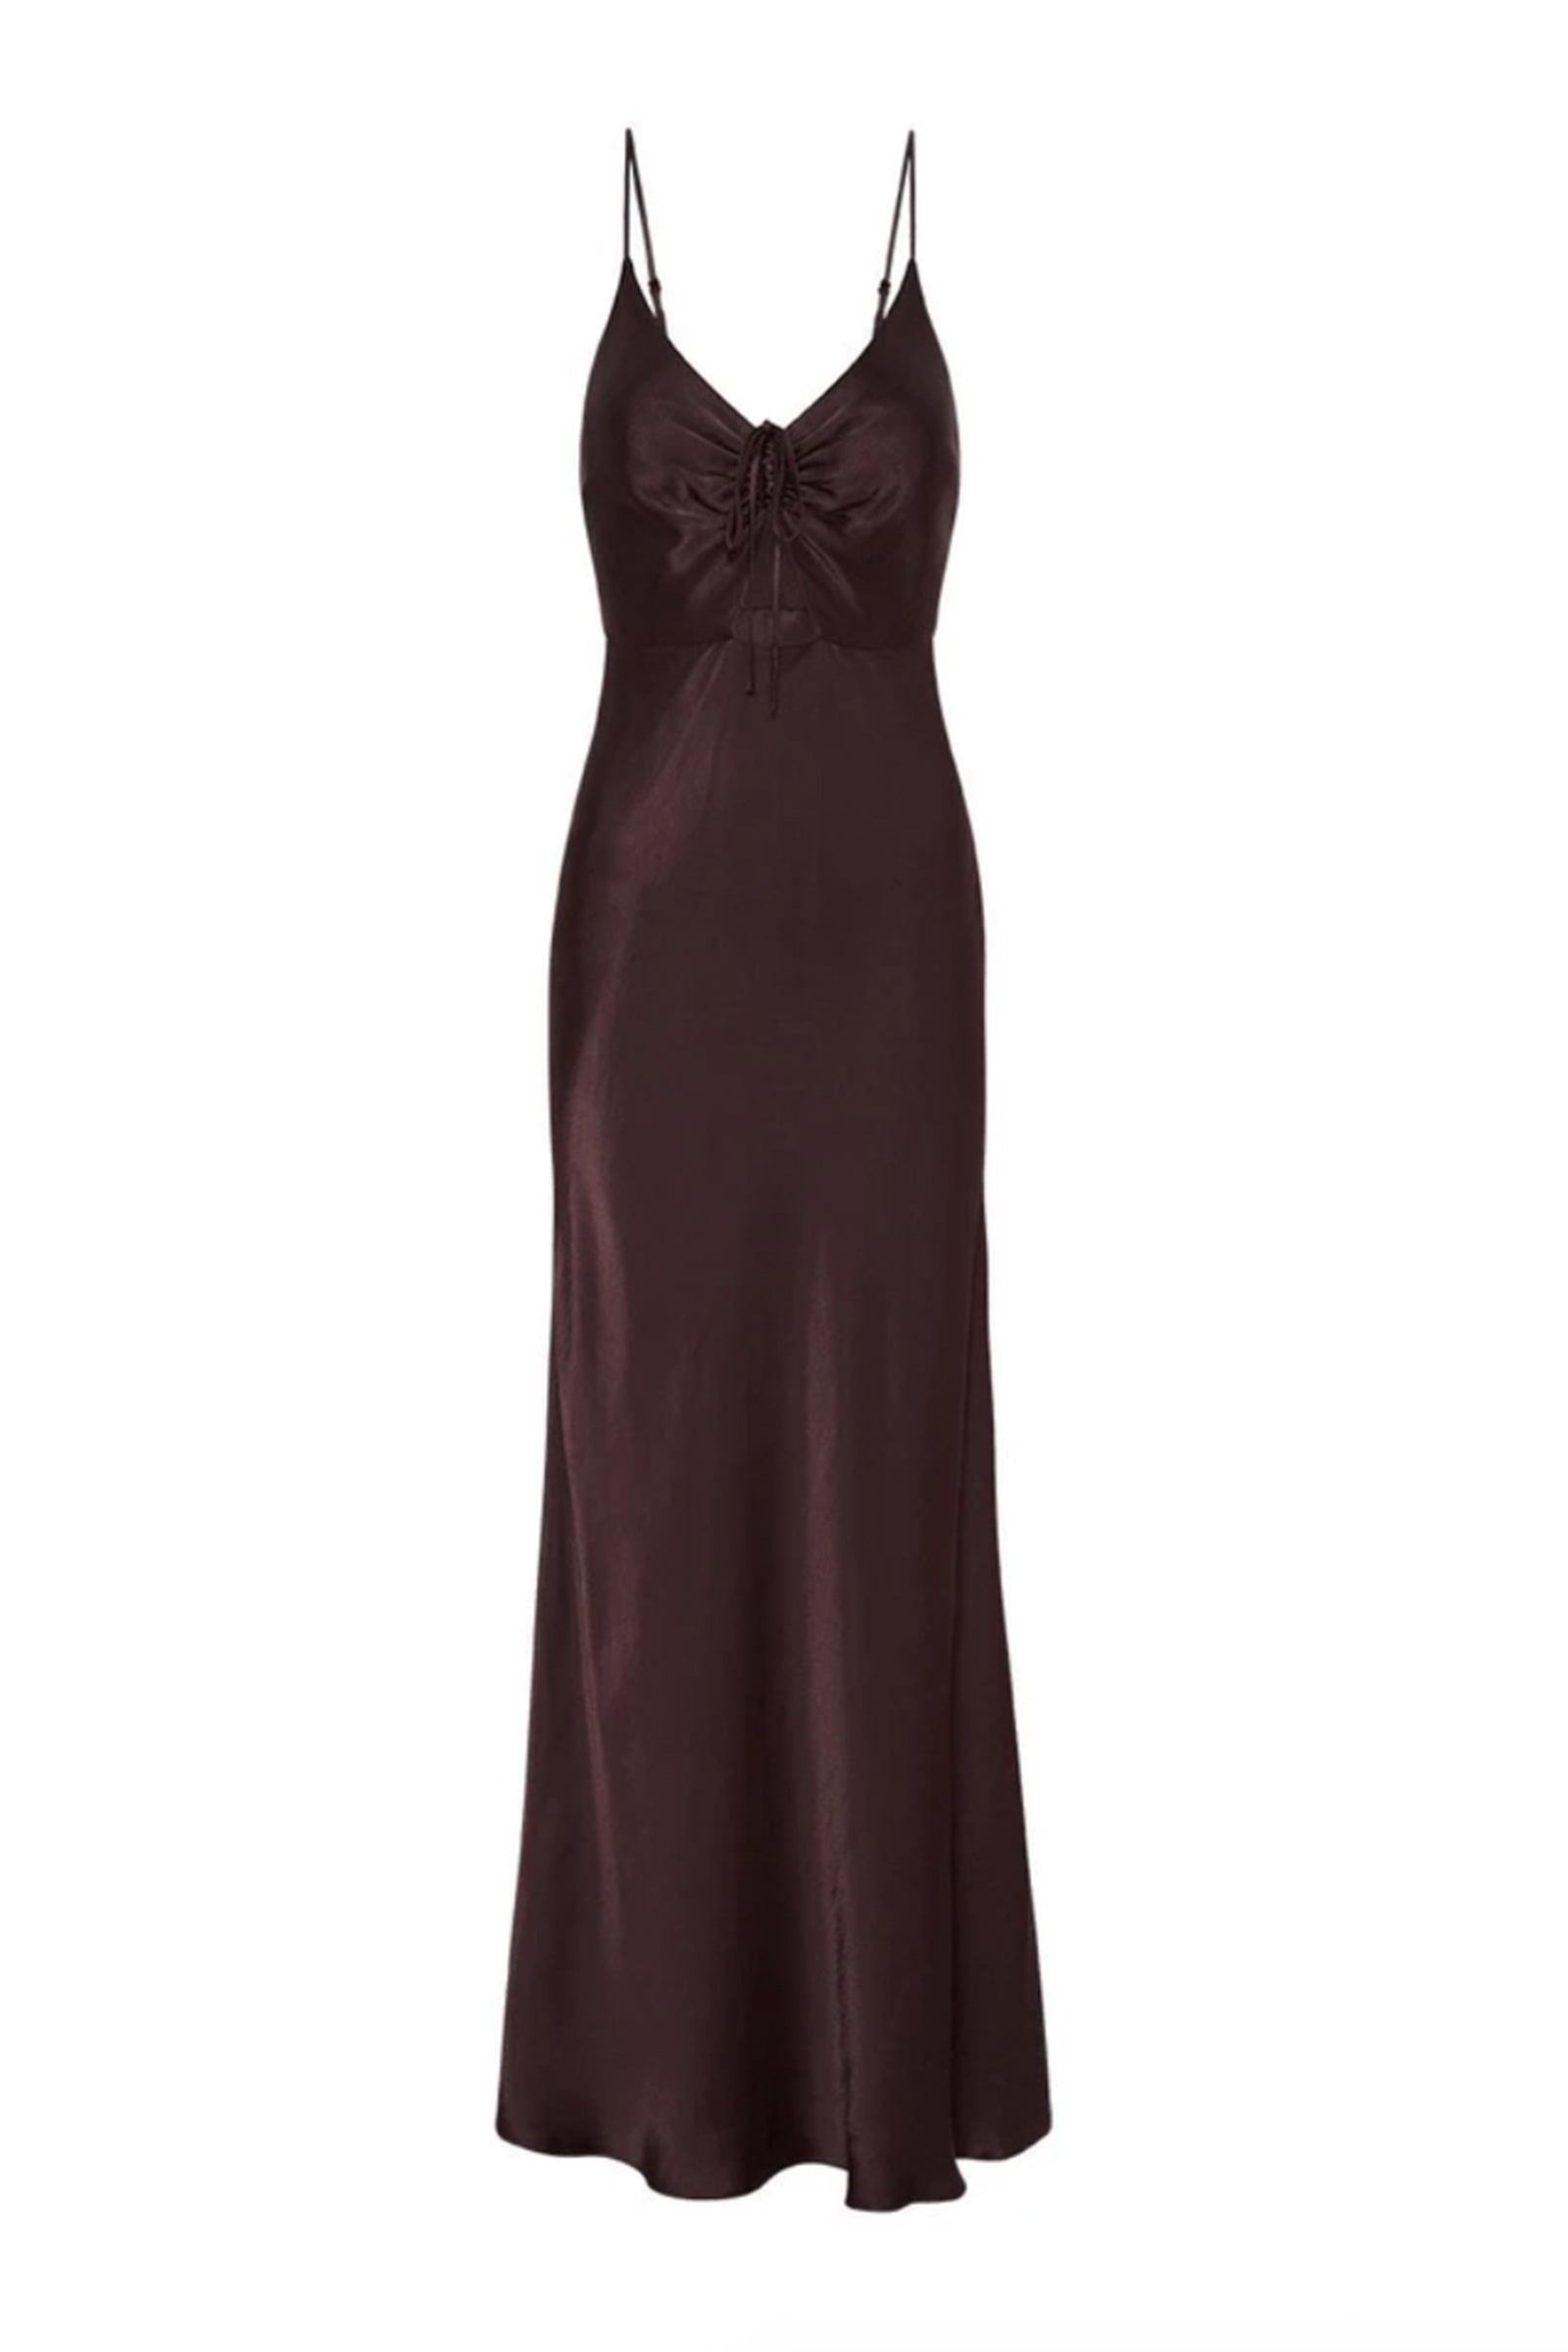 WRIGHT - Ruched Bias Slip Dress – GOLDWATERS